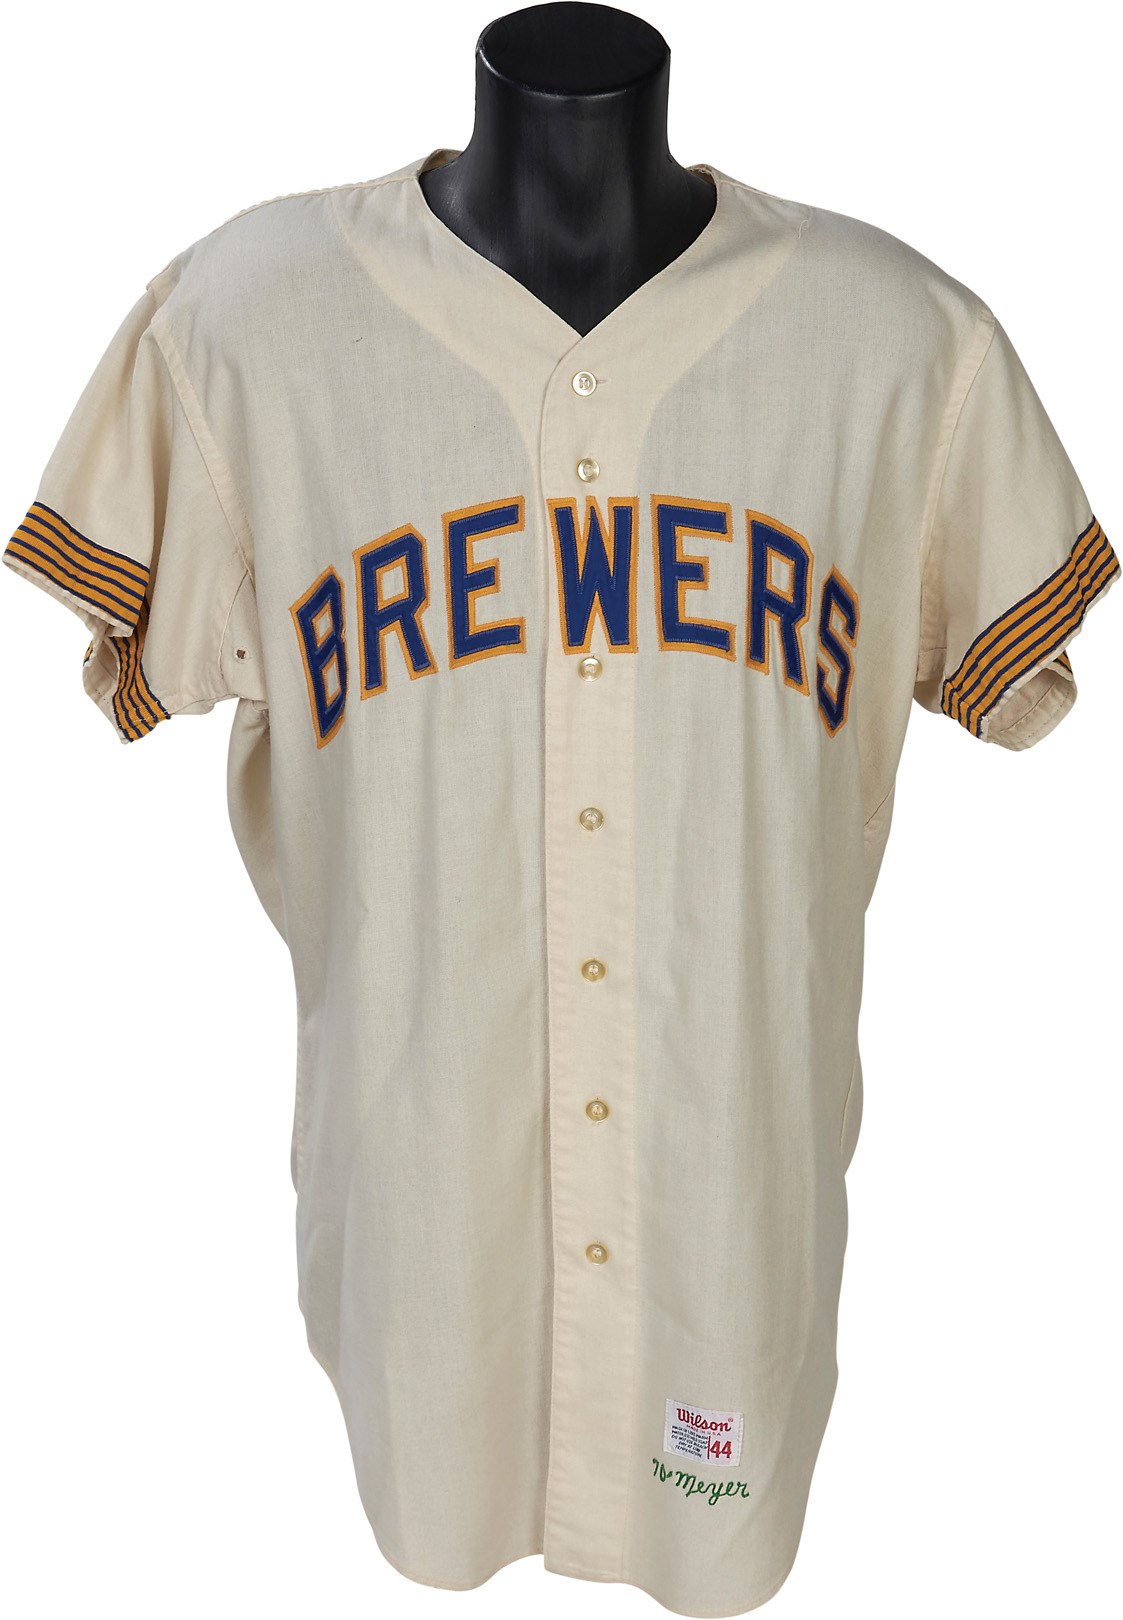 old brewers jerseys